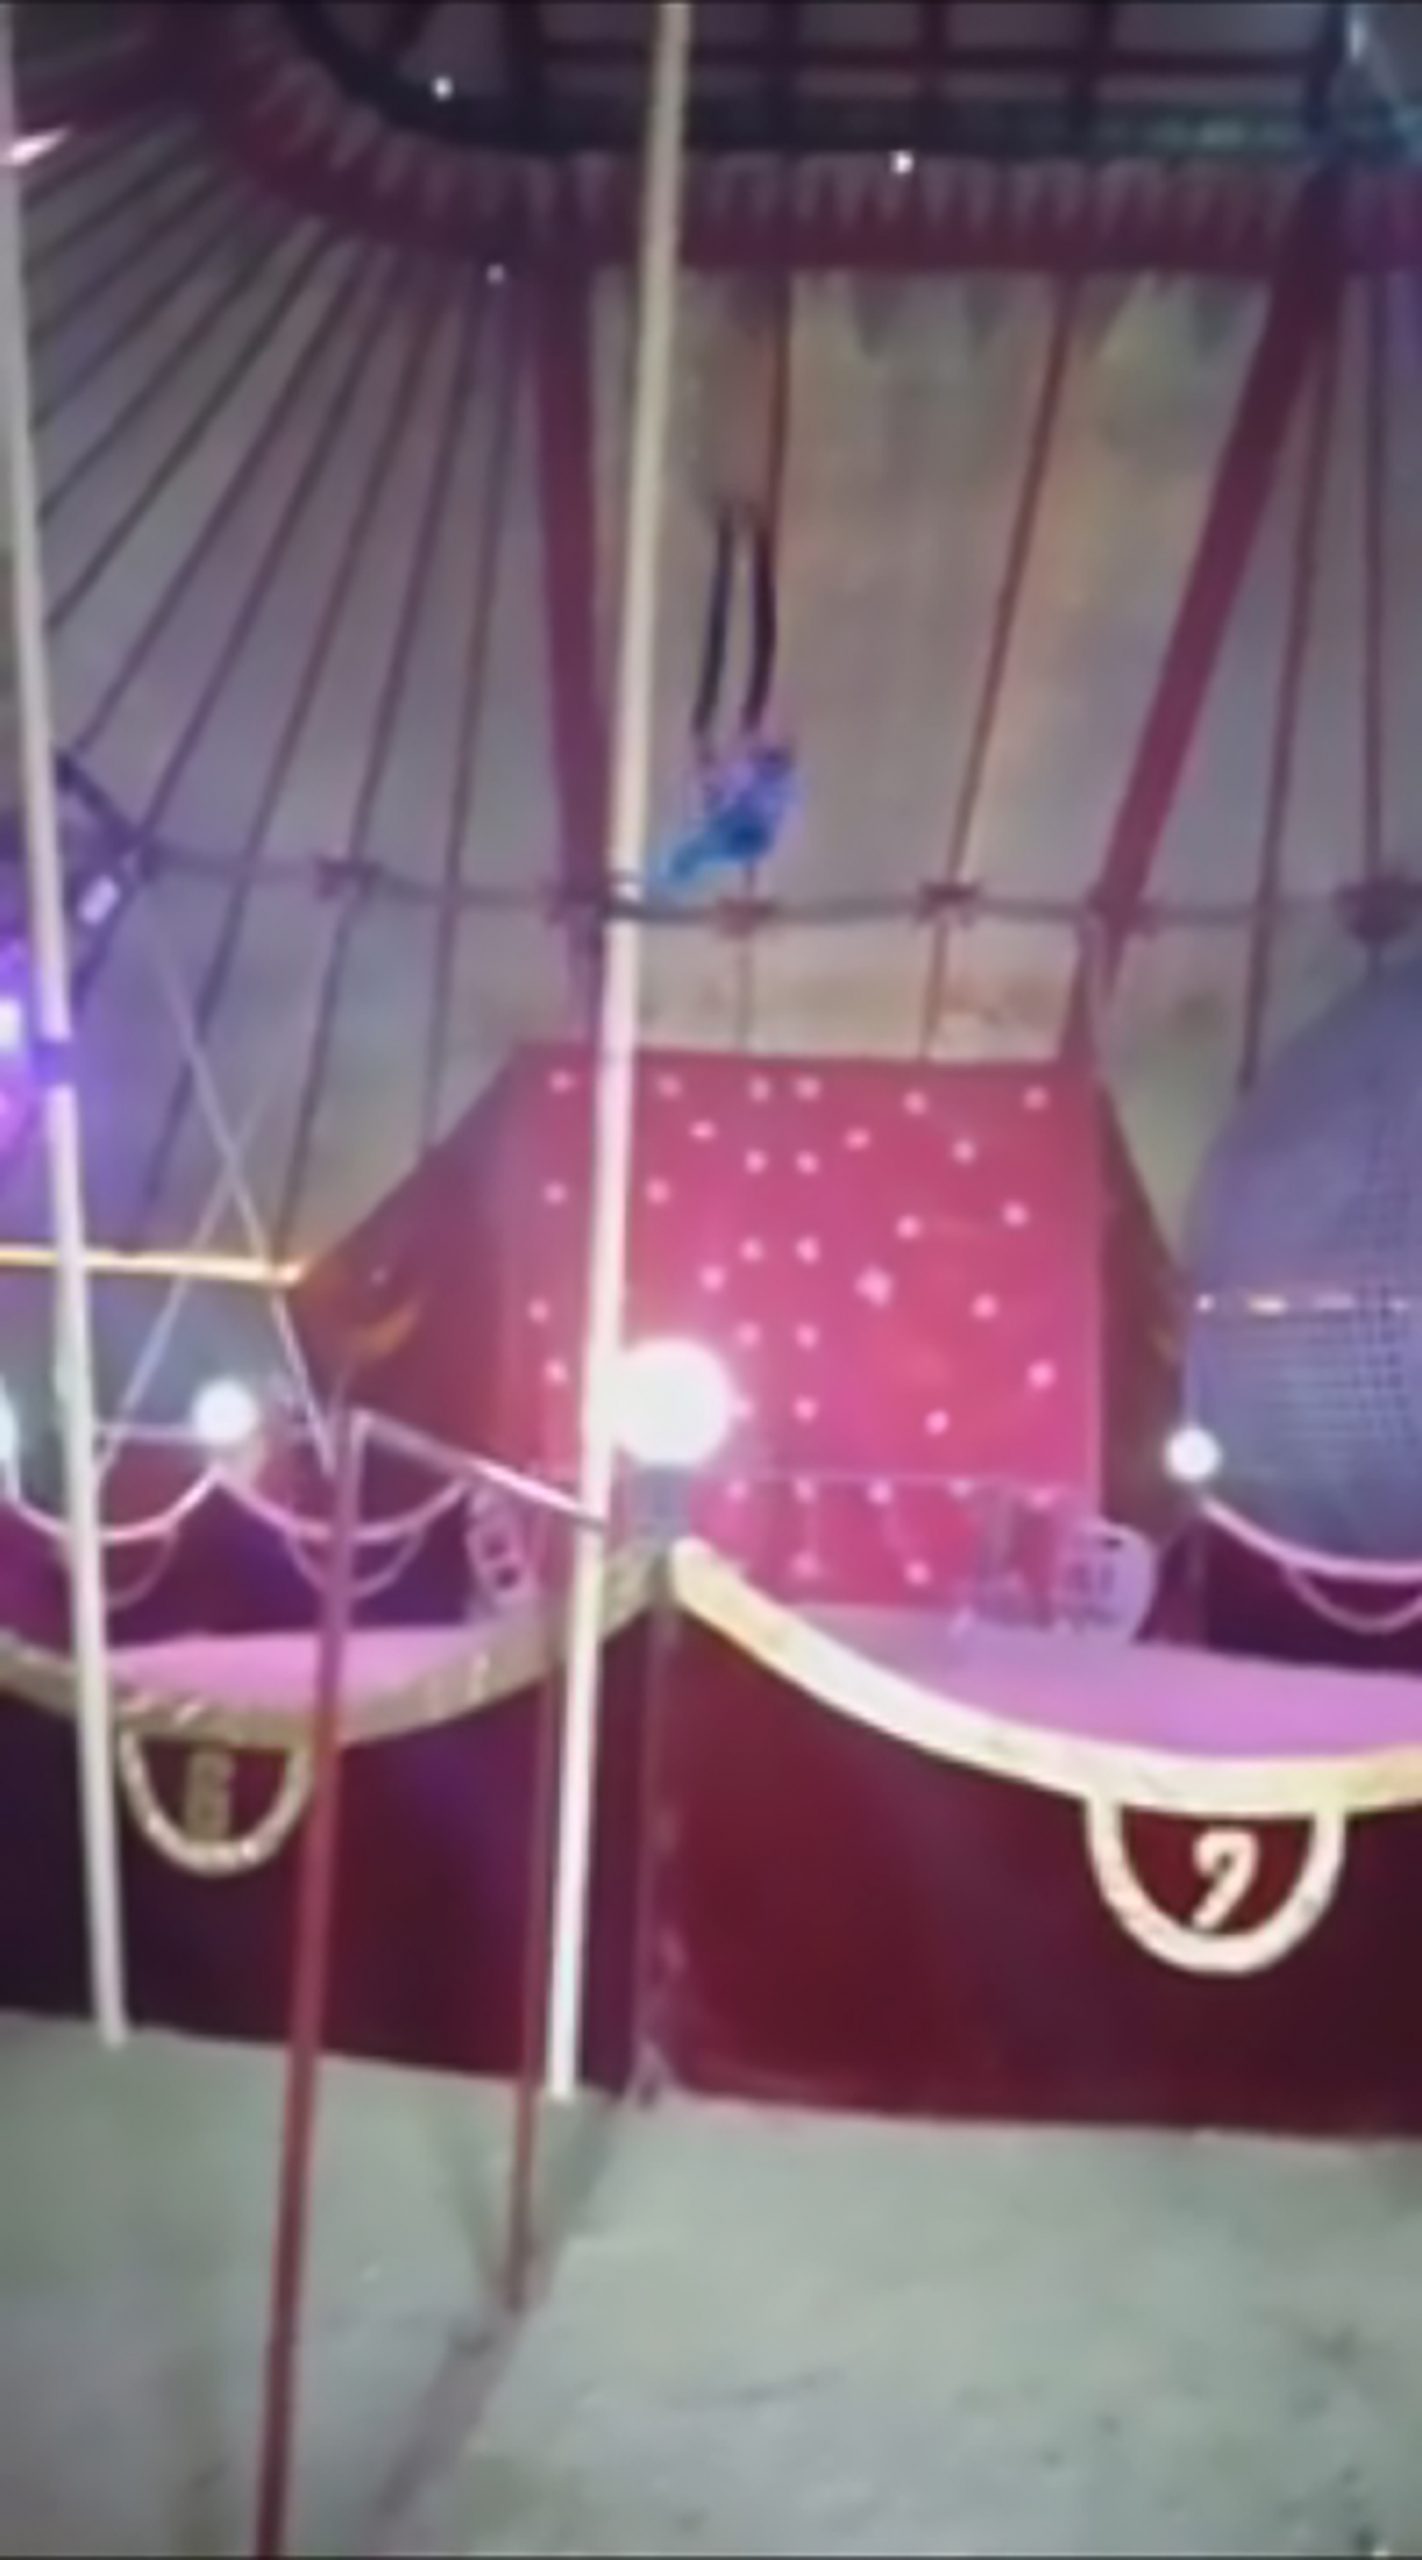 Read more about the article 19yo Circus Acrobat Plummets To Ground After Rope Snaps